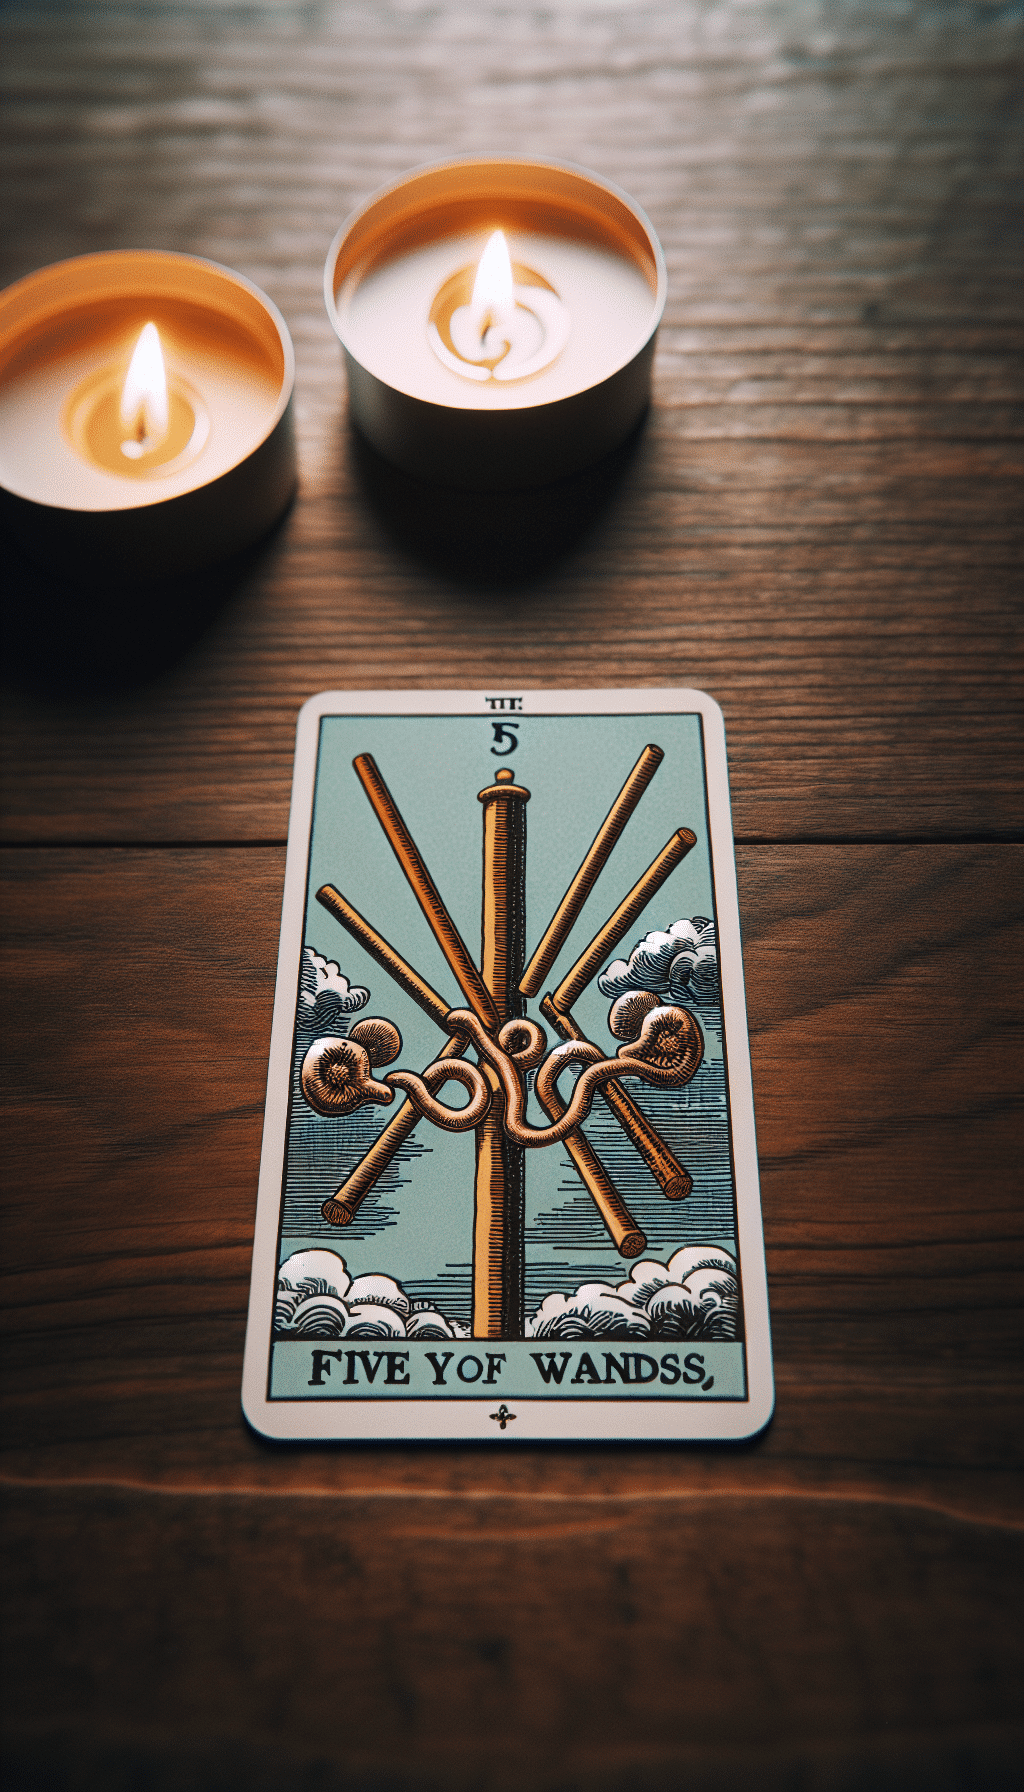 Understanding Conflict and Competition in Health: The Five of Wands Tarot Card Explained